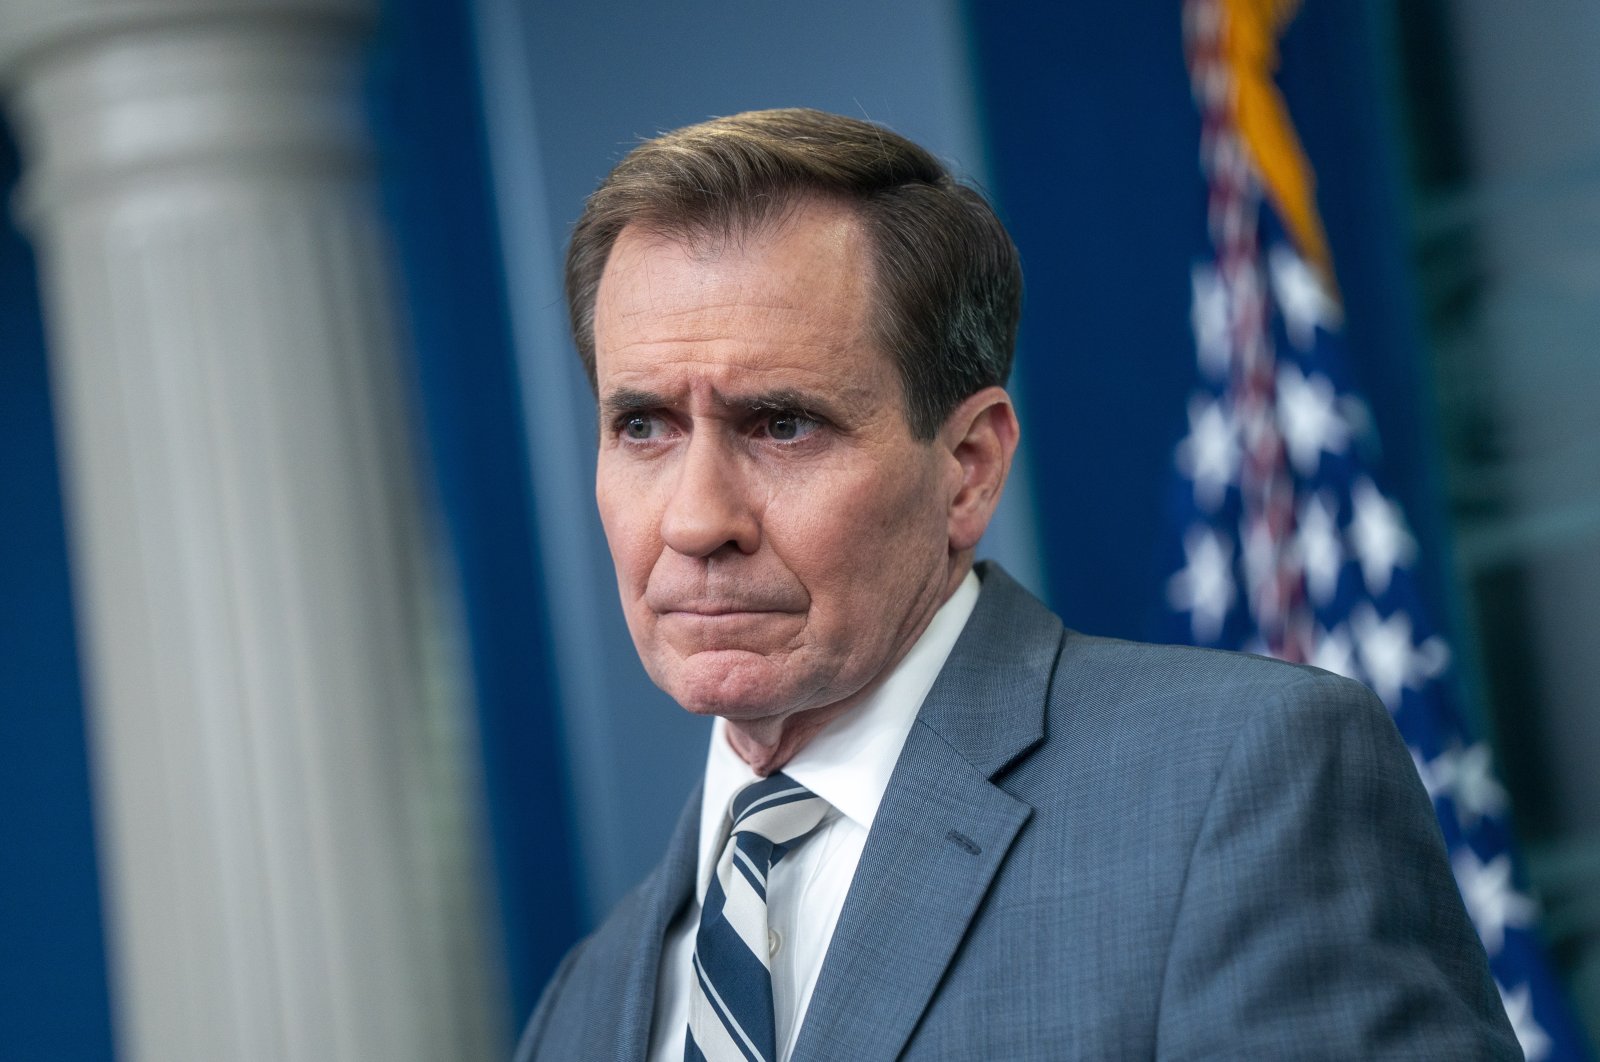 Coordinator for Strategic Communications at the National Security Council John Kirby responds to a question from the news media during the daily briefing at the White House in Washington, DC, USA, 02 March 2023. (EPA Photo)